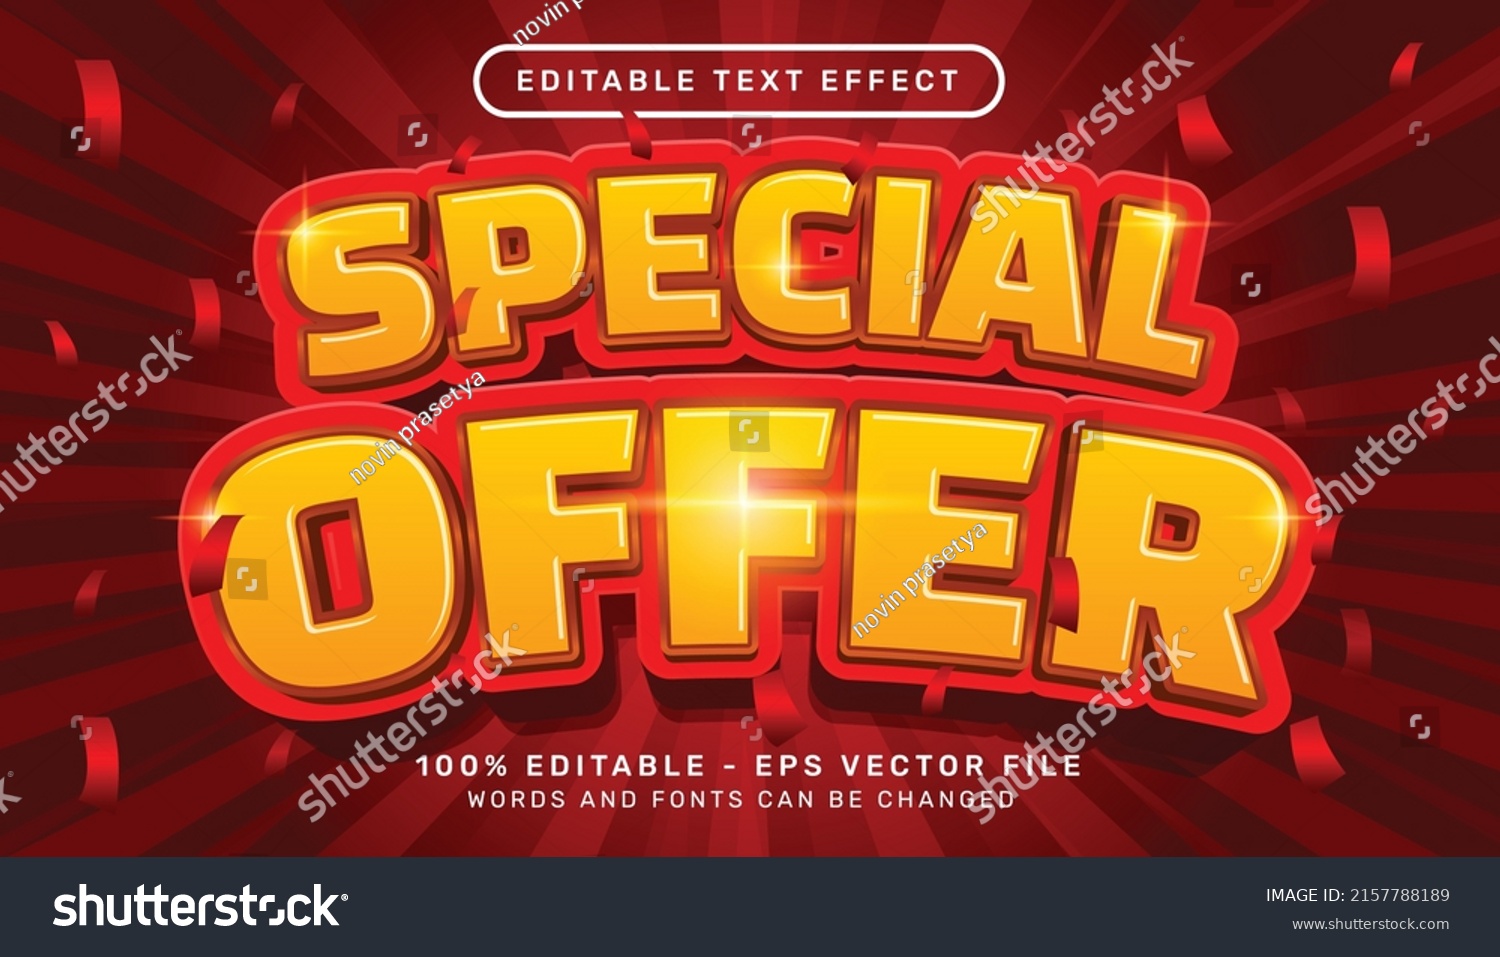 special offer 3d text effect and editable text effect
 #2157788189